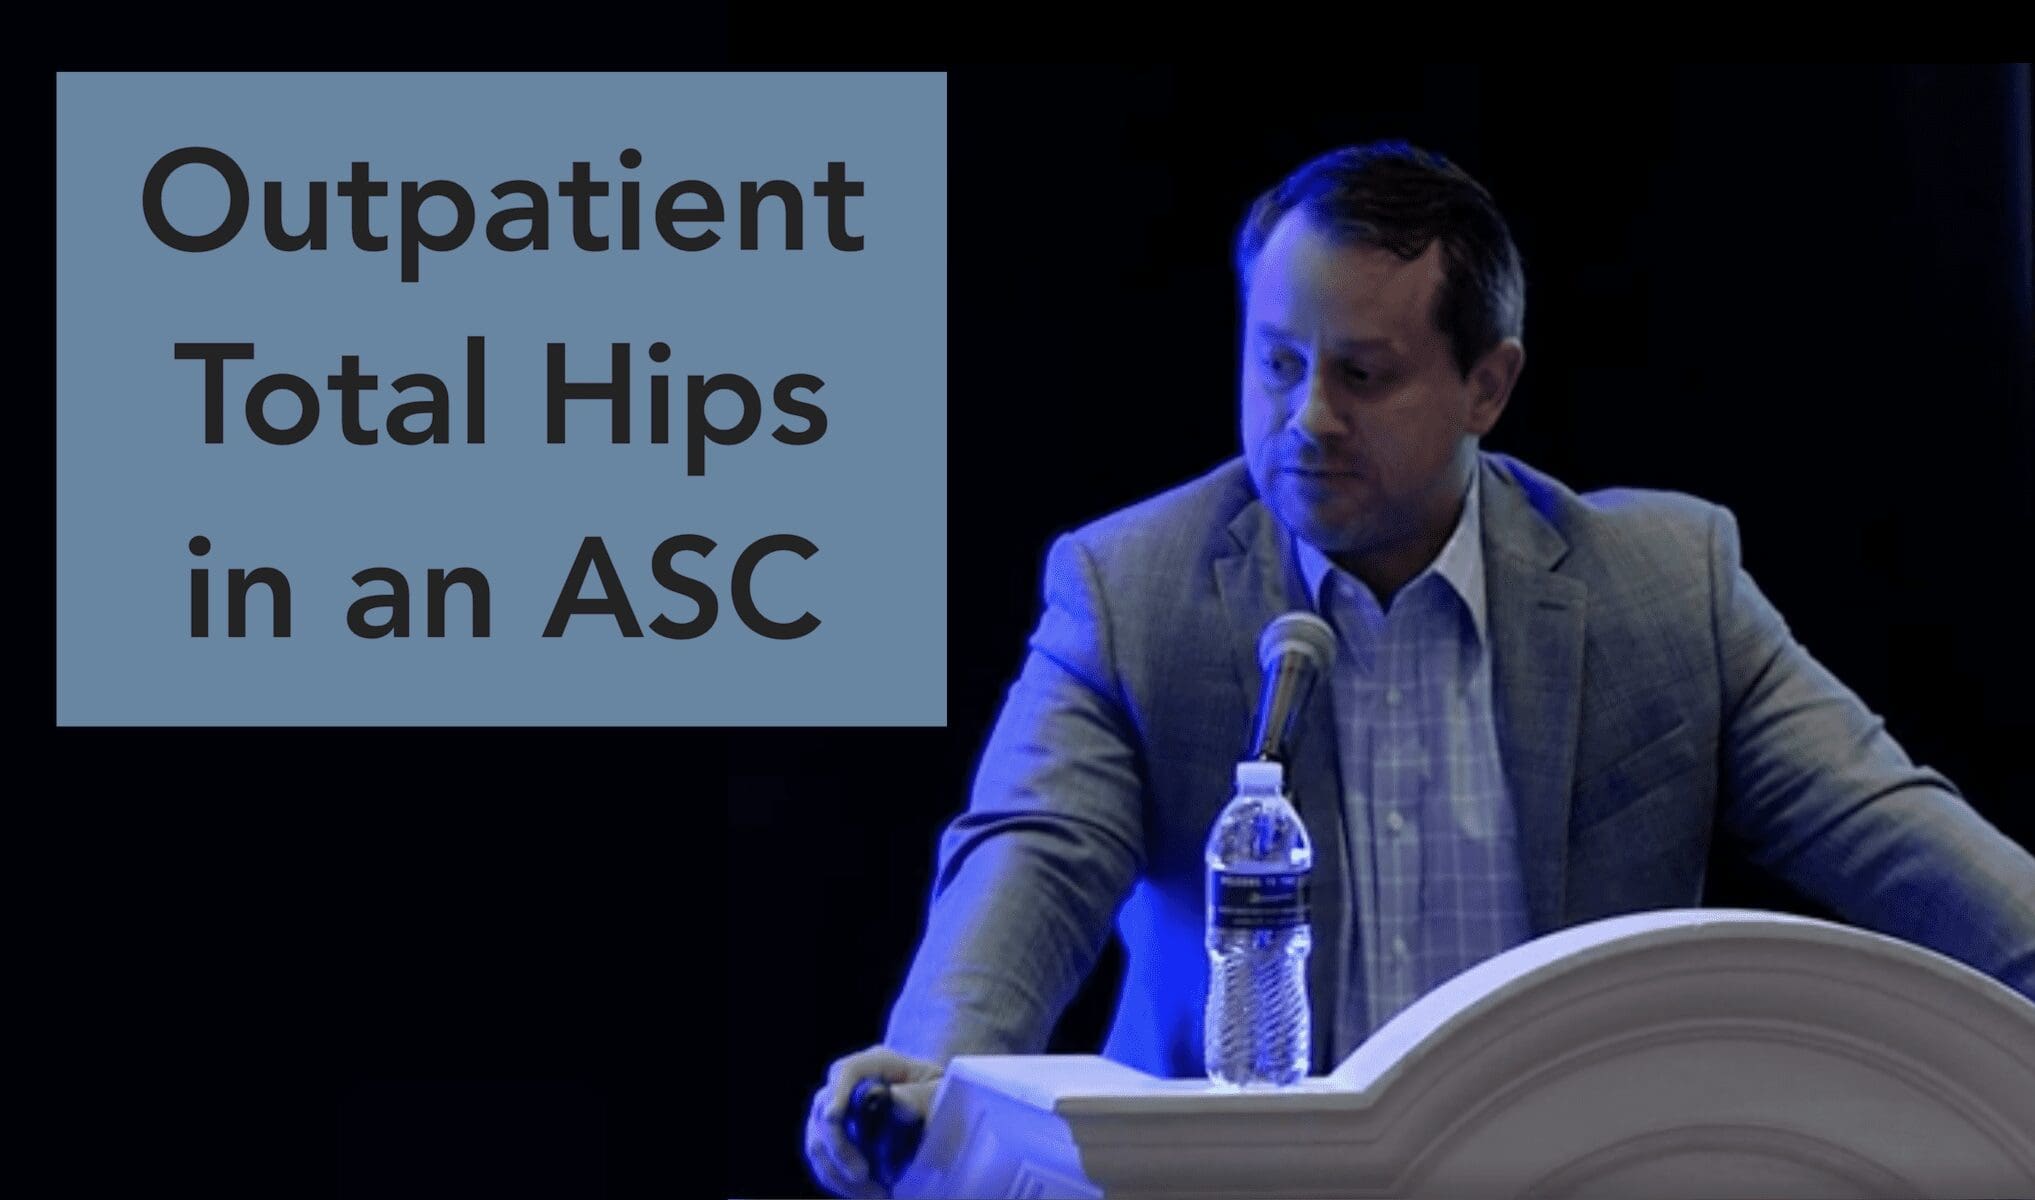 Outpatient Total Hips in an ASC